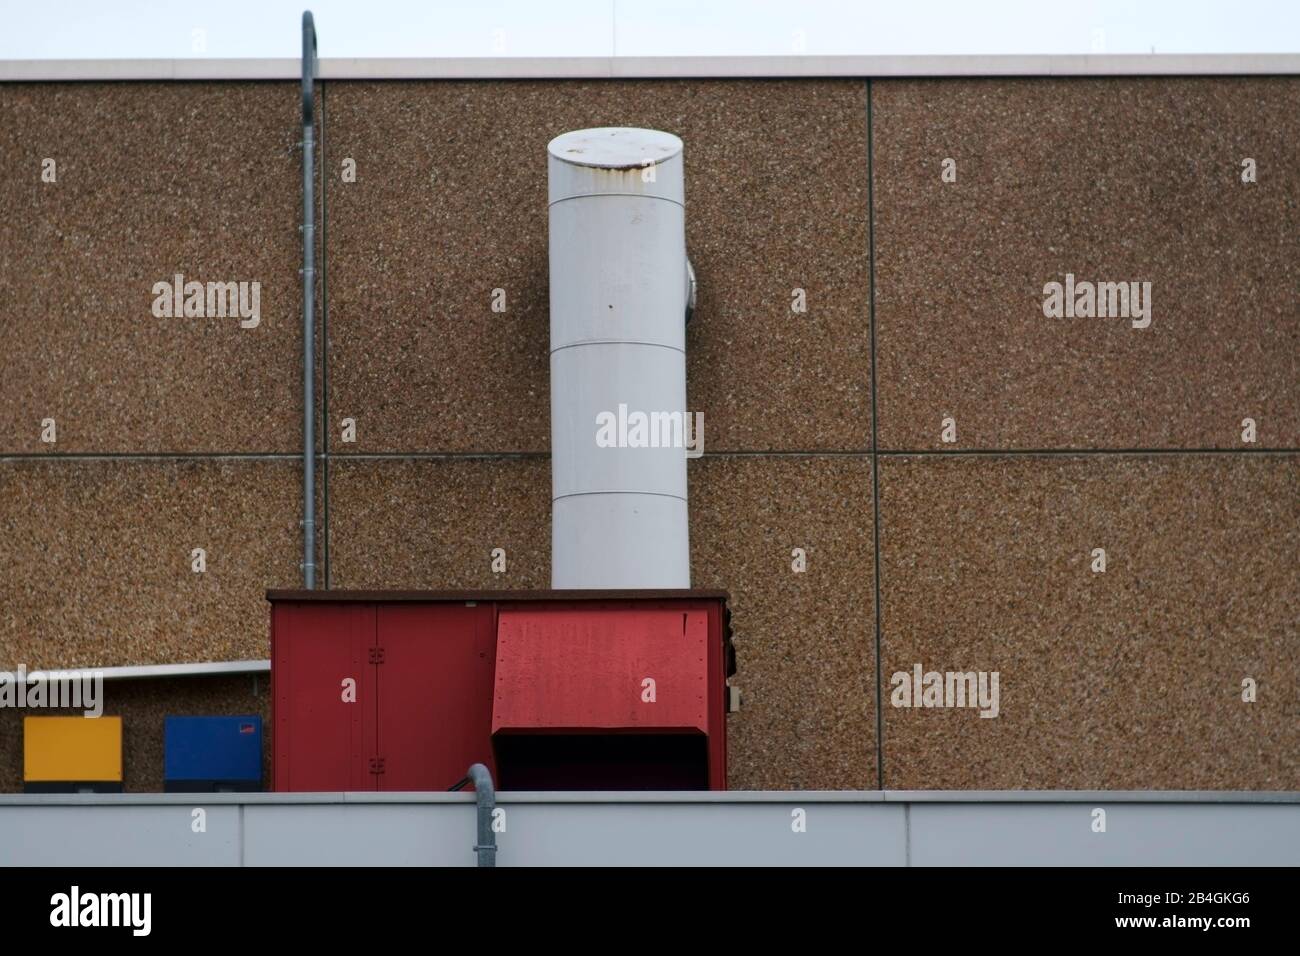 The ventilation and extractor hoods of a public building. Stock Photo